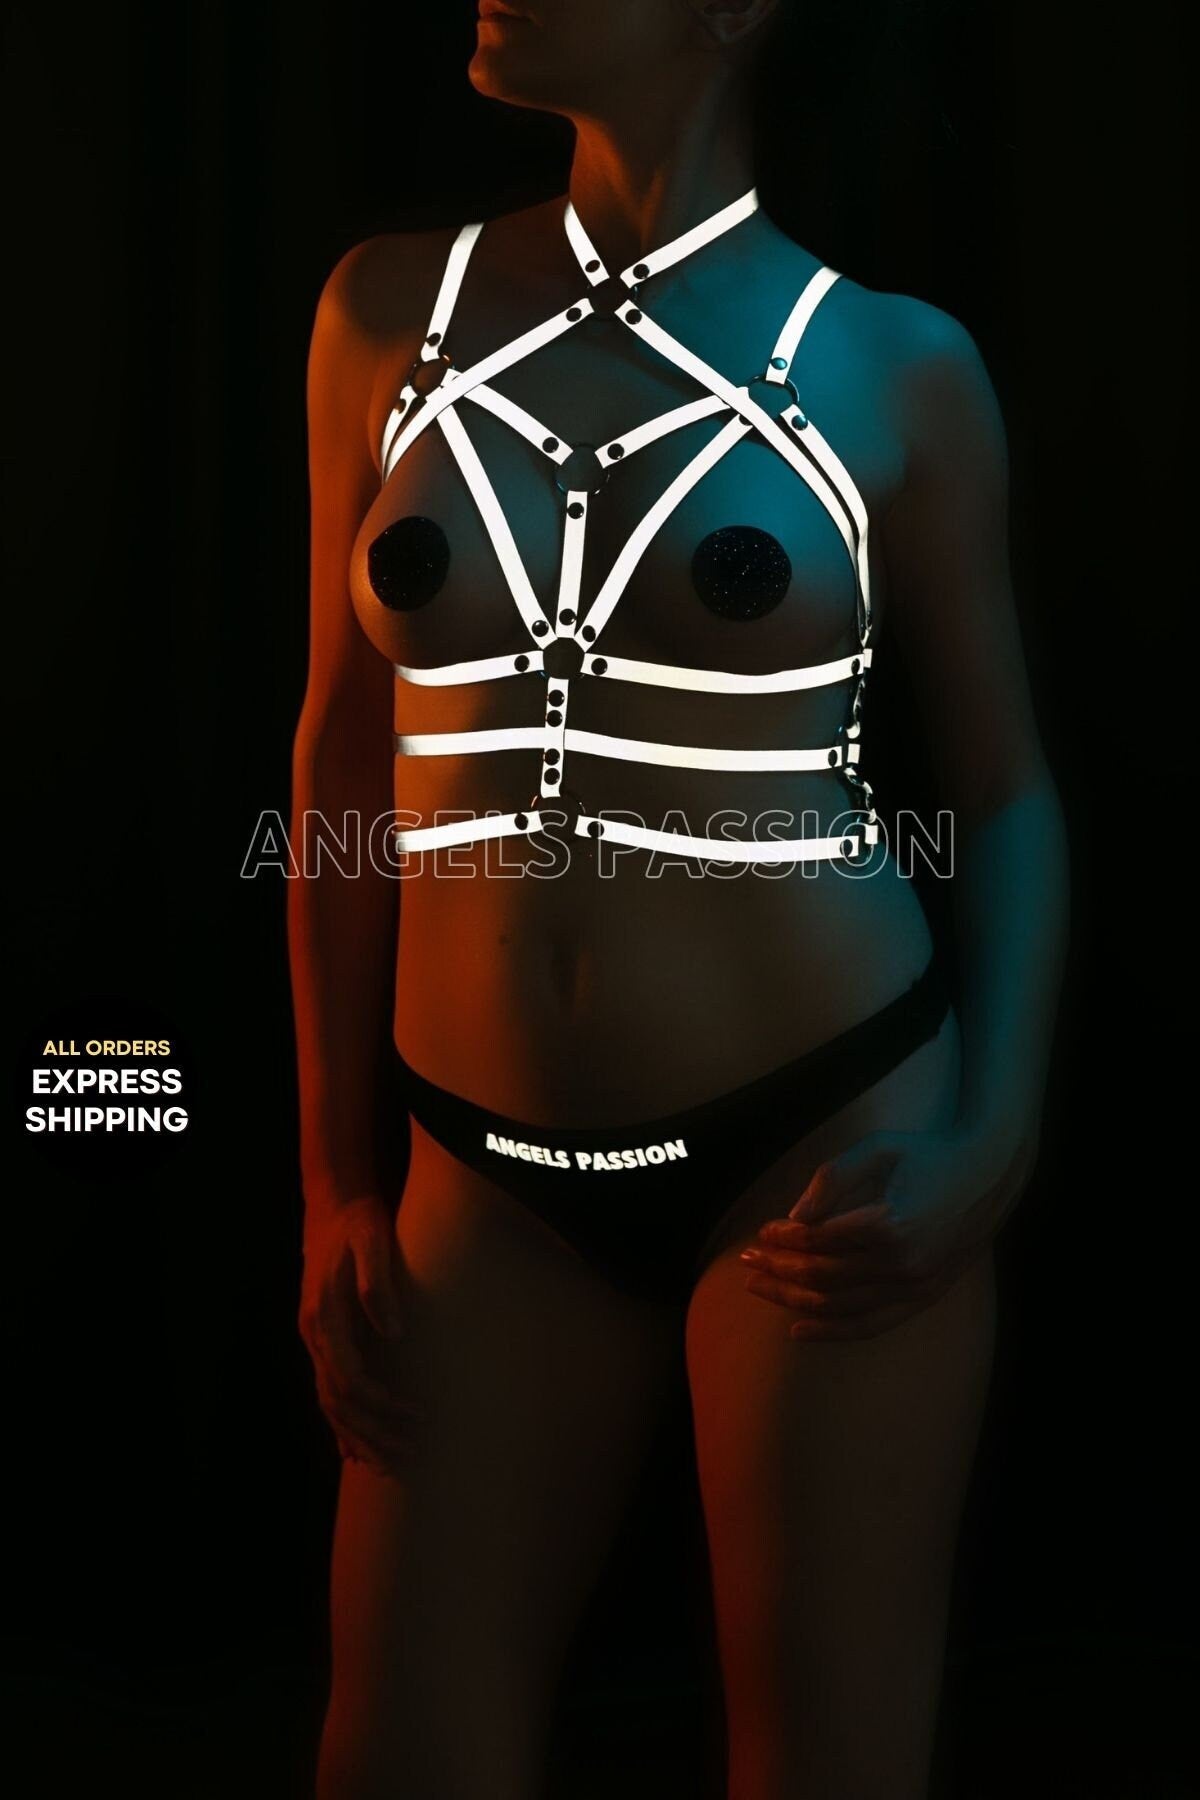 Rave Outfit Reflective Women Set Glow in the Dark Burning Man Wear